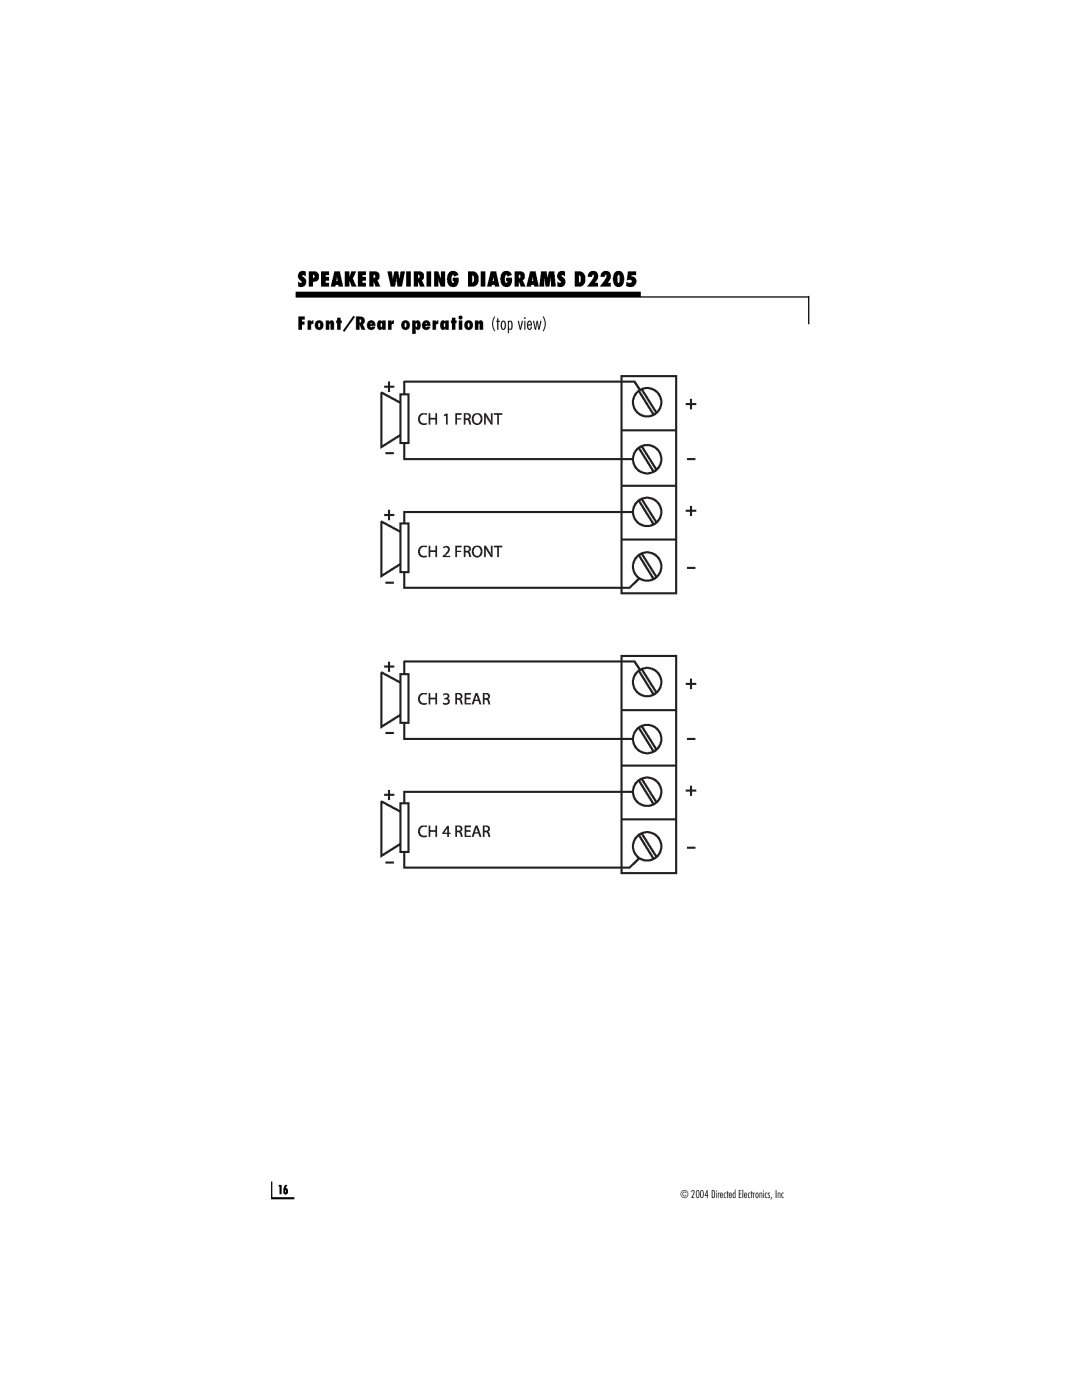 Directed Electronics A1004 SPEAKER WIRING DIAGRAMS D2205, Front/Rear operation top view, Directed Electronics, Inc 